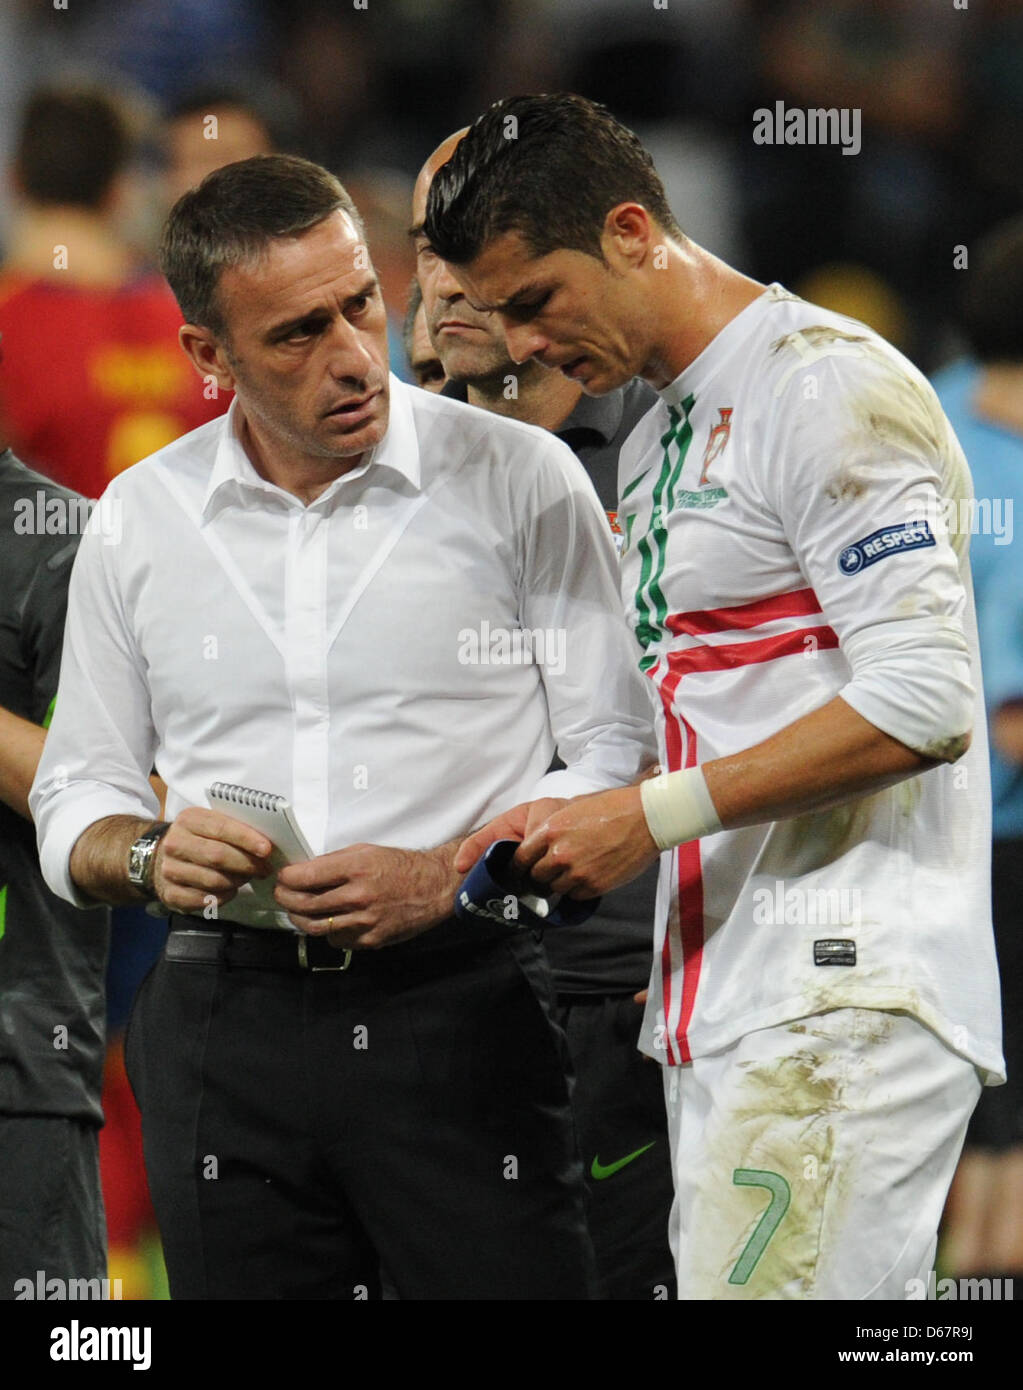 Portugal's head coach Paulo Bento (L) talks to Cristiano Ronaldo during UEFA EURO 2012 semi-final soccer match Portugal vs Spain at Donbass Arena in Donetsk, Ukraine, 27 June 2012. Photo: Thomas Eisenhuth dpa (Please refer to chapters 7 and 8 of http://dpaq.de/Ziovh for UEFA Euro 2012 Terms & Conditions)  +++(c) dpa - Bildfunk+++ Stock Photo